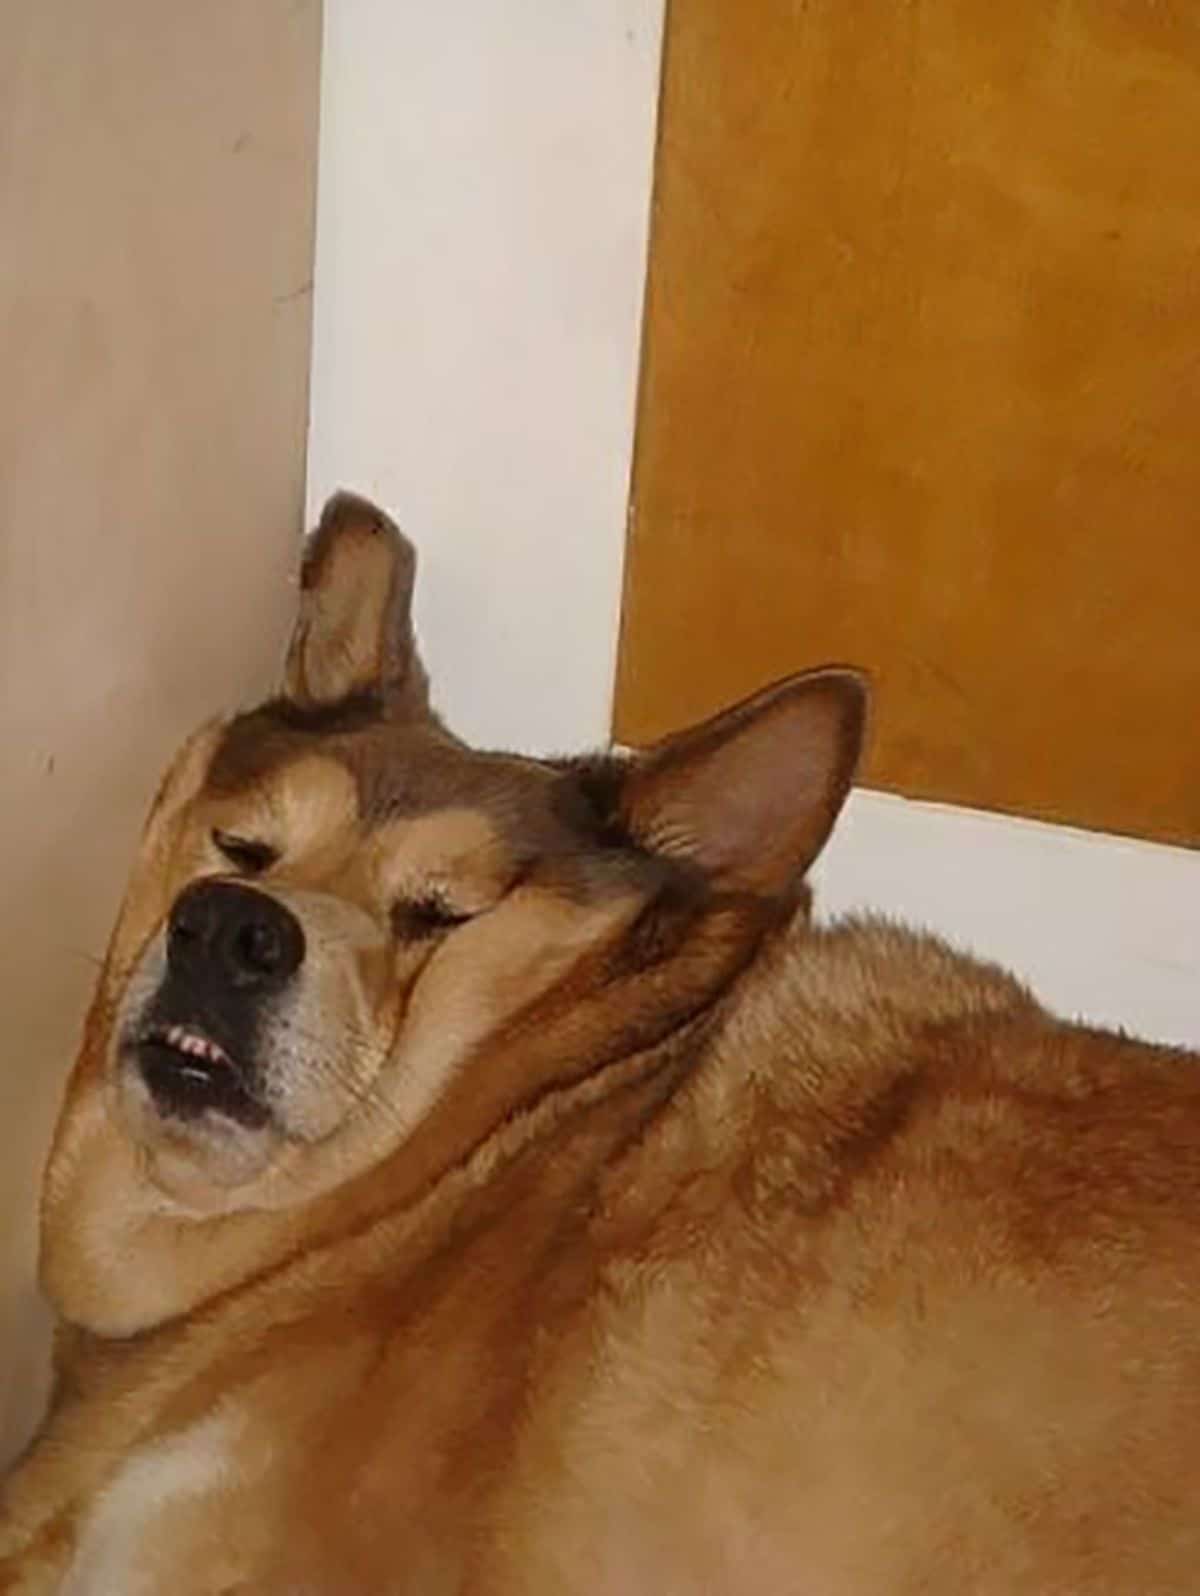 brown dog sleeping with the face squished against a wall